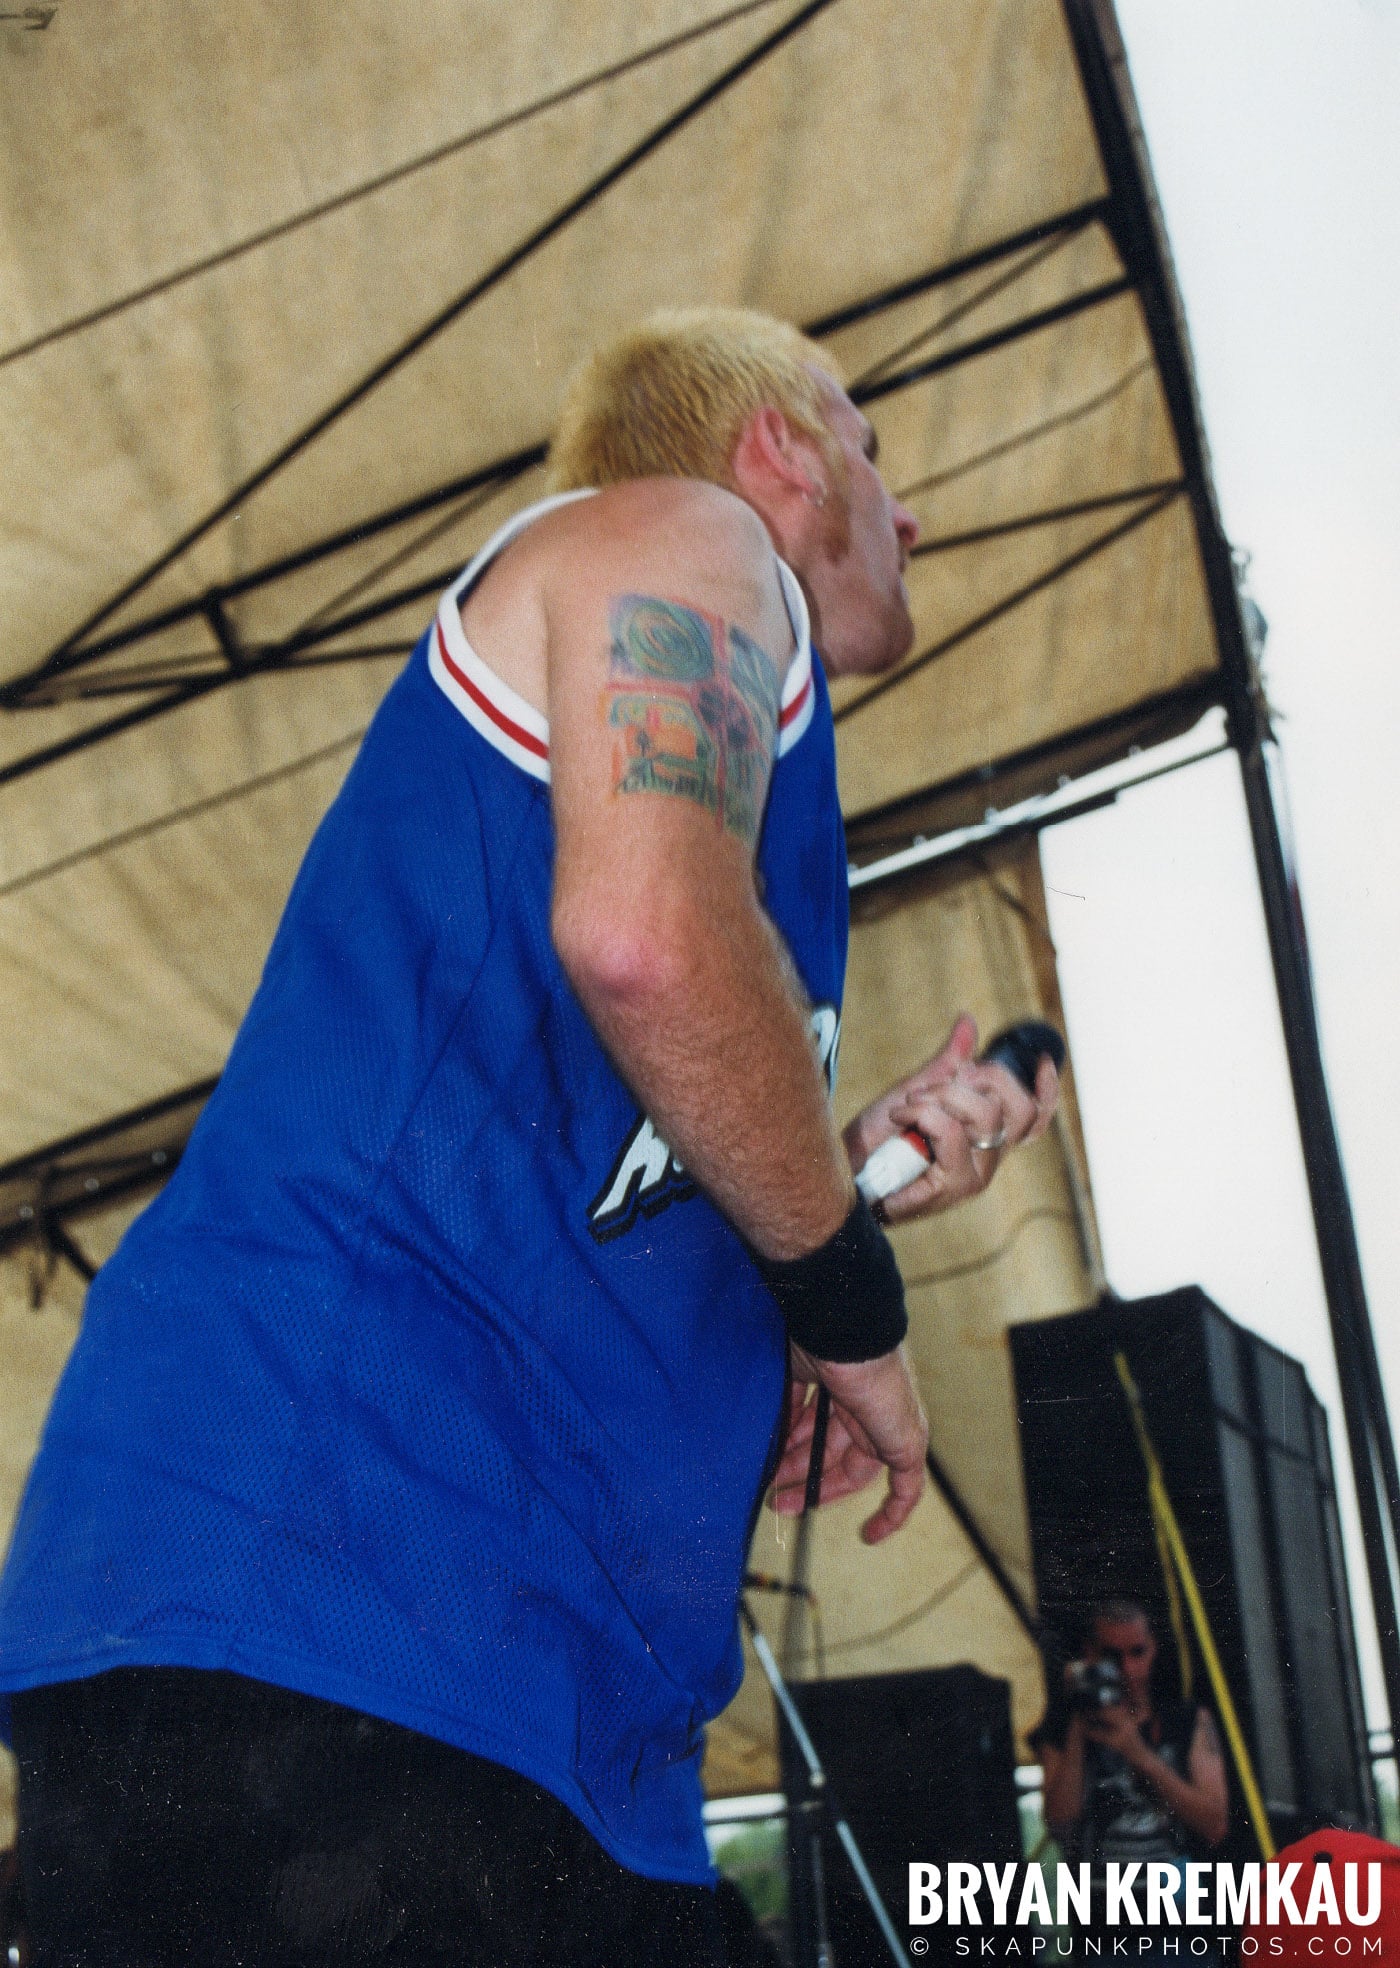 7 Seconds @ Vans Warped Tour, Randall's Island, NYC - 7.16.99 (3)